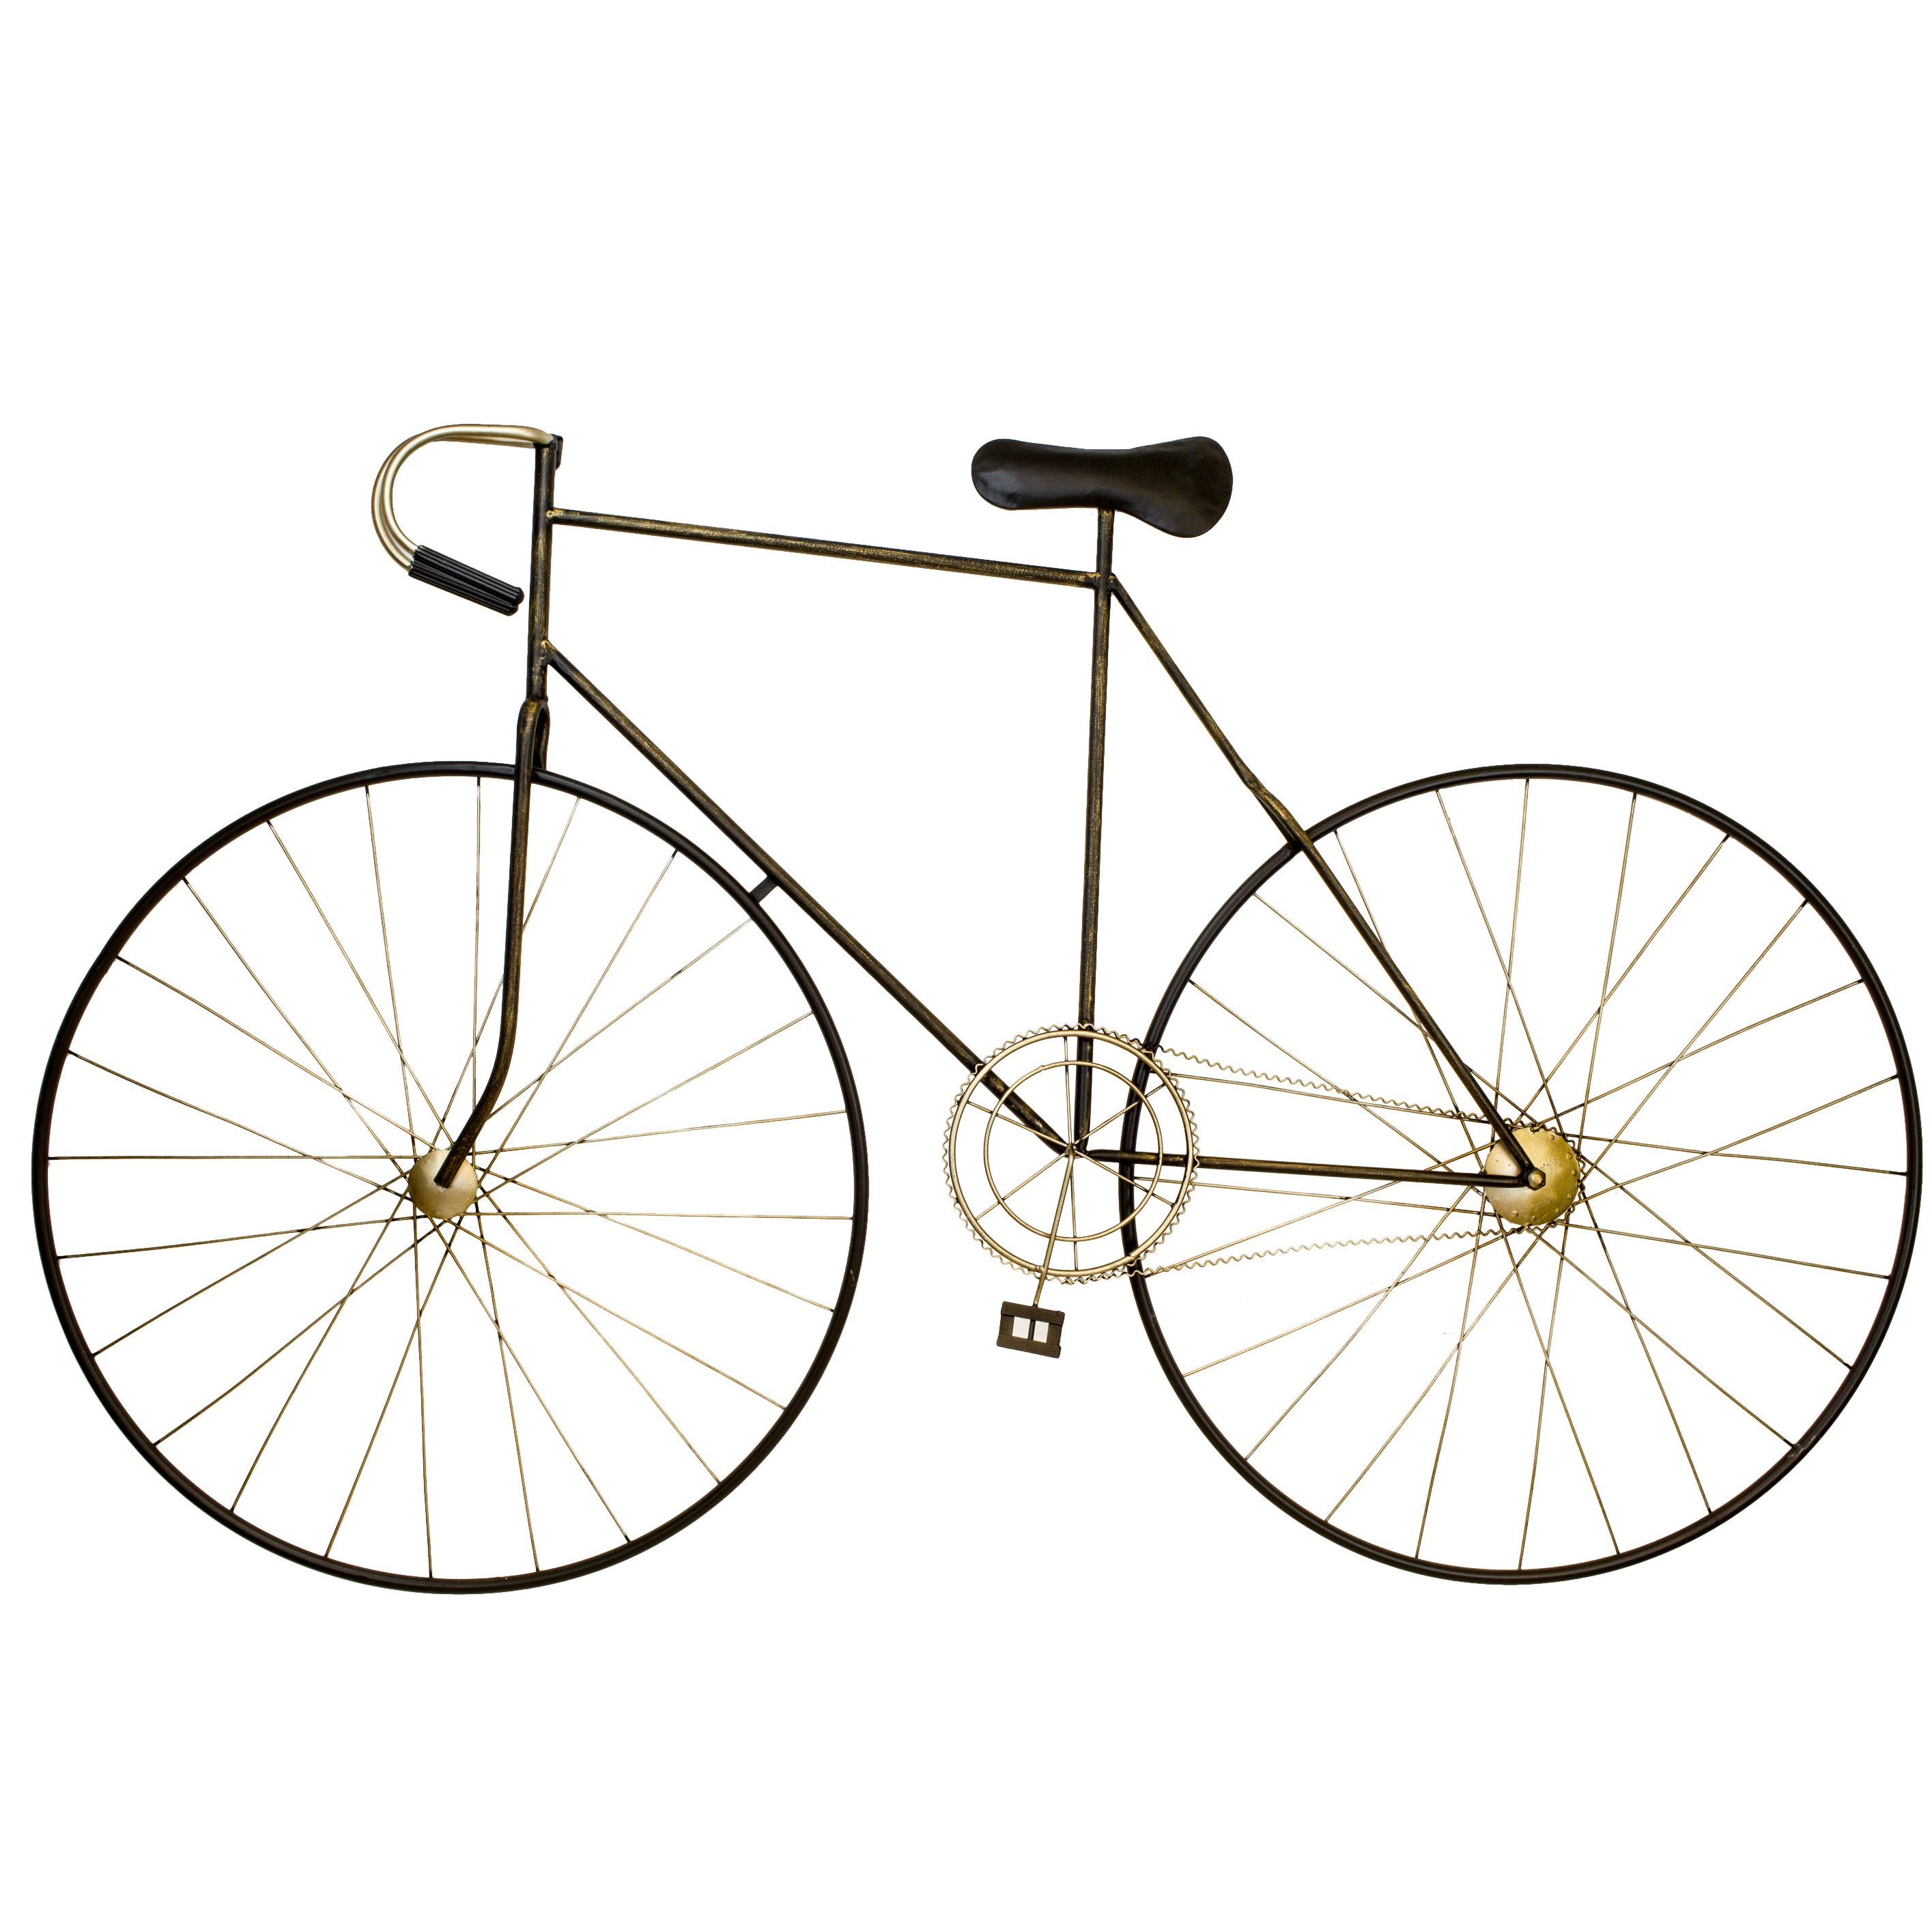 Newest Bayaccents Large Metal Bicycle Wall Décor (View 14 of 20)